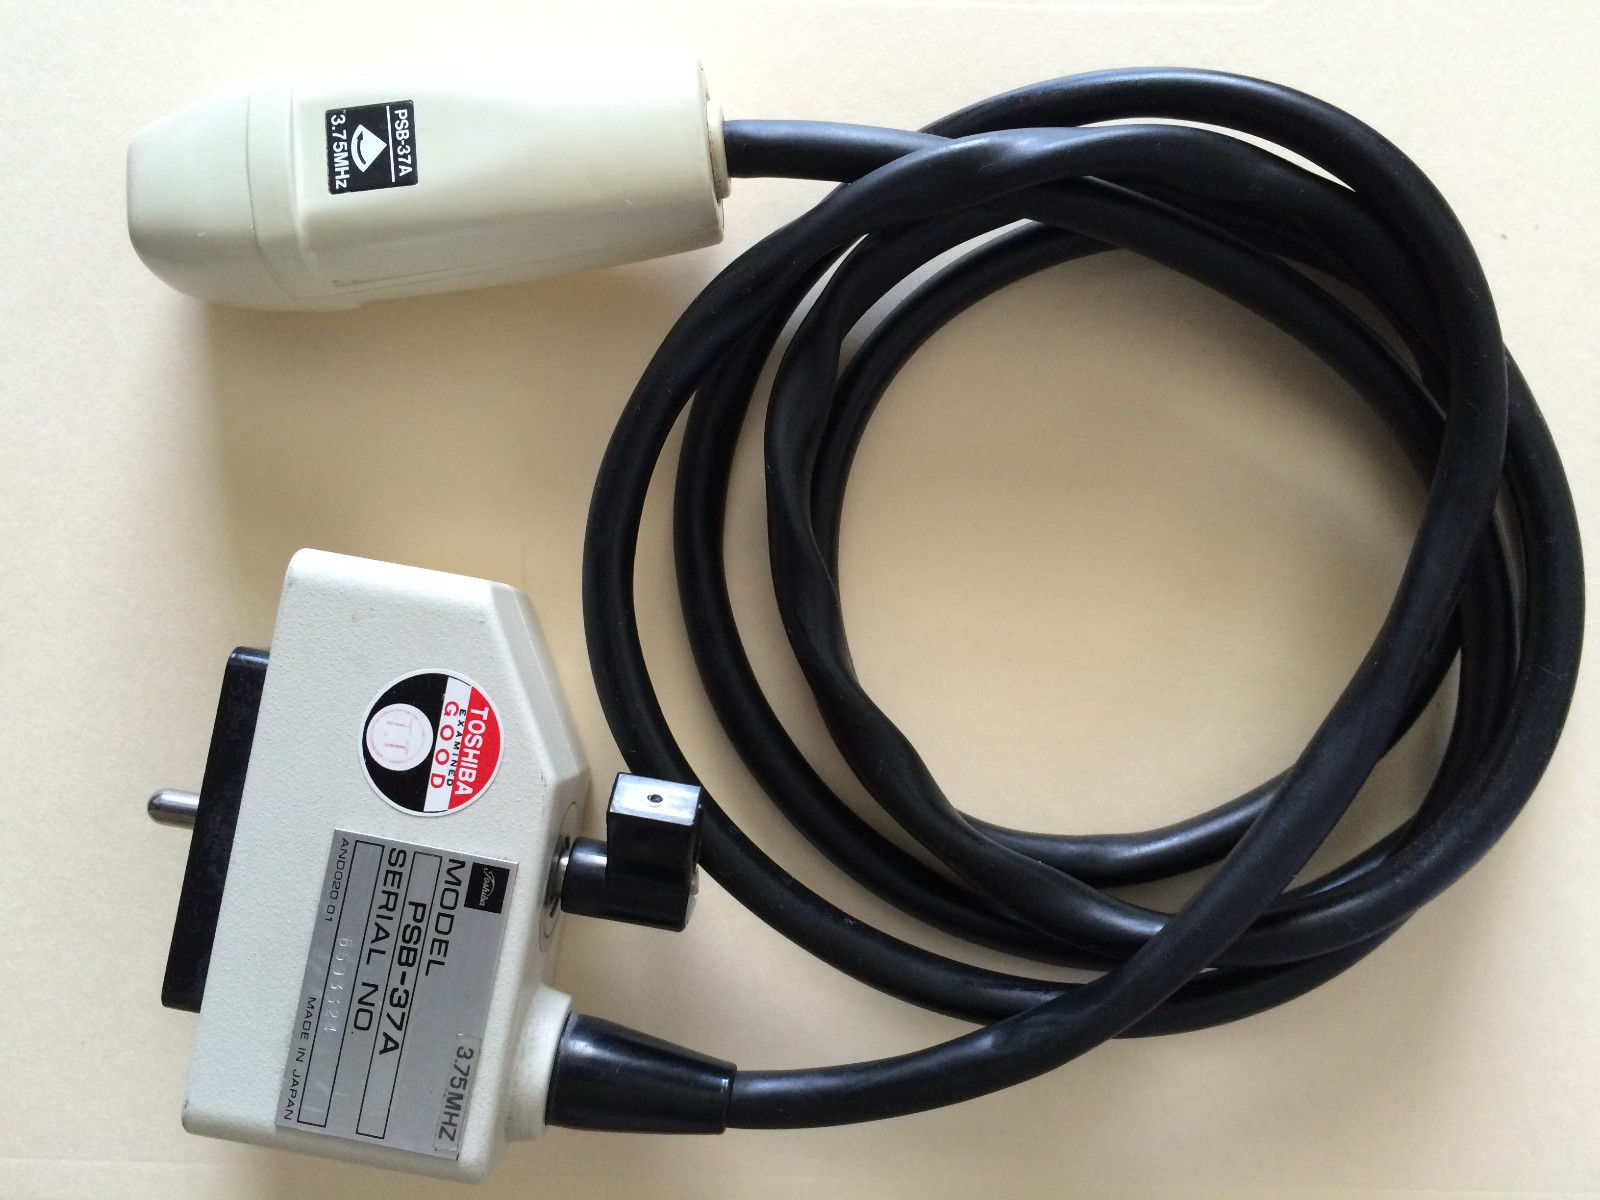 Ultrasound Transducer Probe Model PSB-37A 3.75 MHz Probe by Toshiba - USED DIAGNOSTIC ULTRASOUND MACHINES FOR SALE